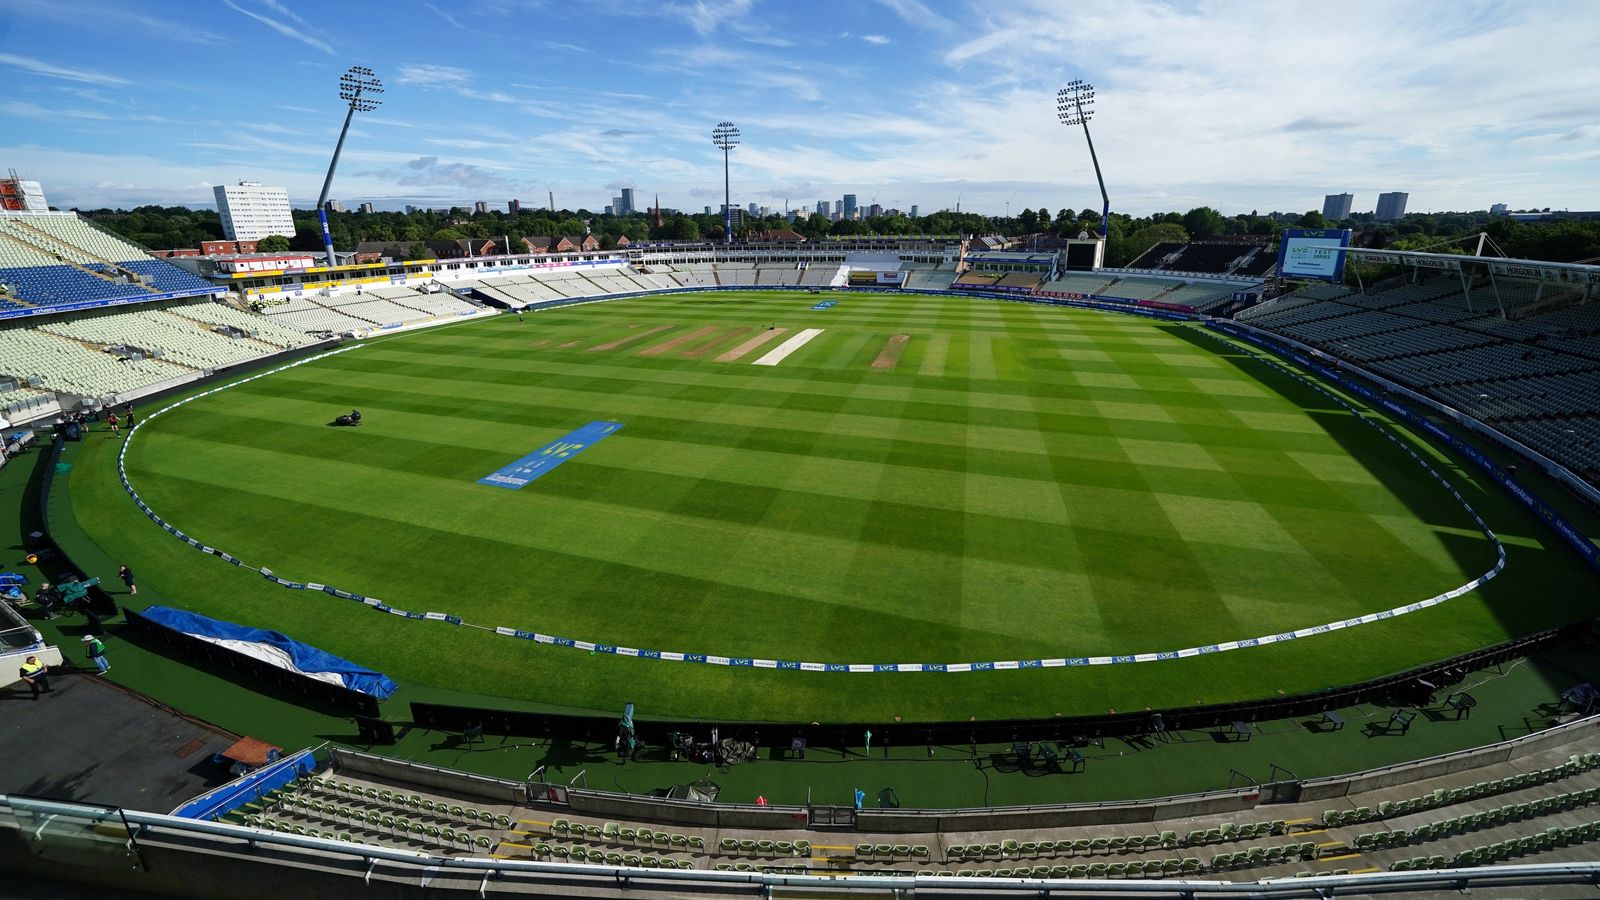 Edgbaston officials investigating allegations of racism in crowd during day four of England vs India Test match